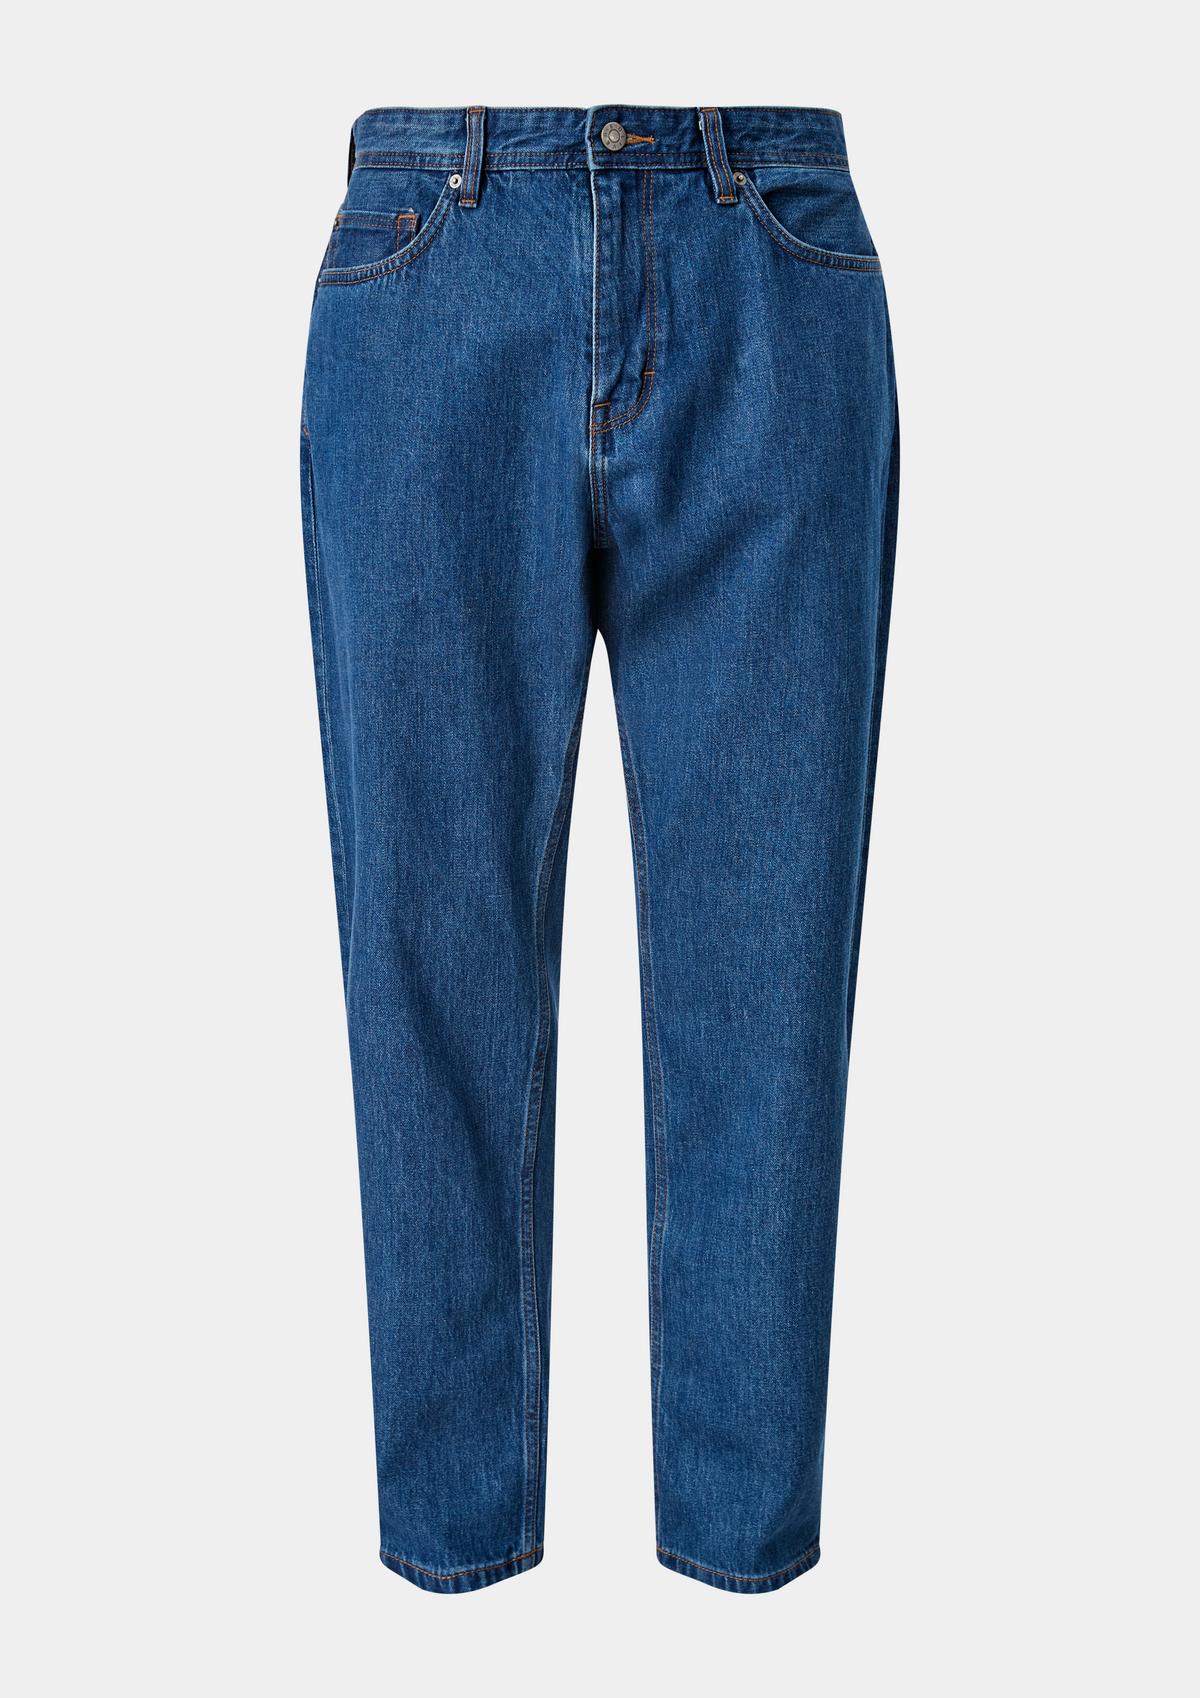 s.Oliver Jeans Grant / Relaxed Fit / Mid Rise / Tapered Leg